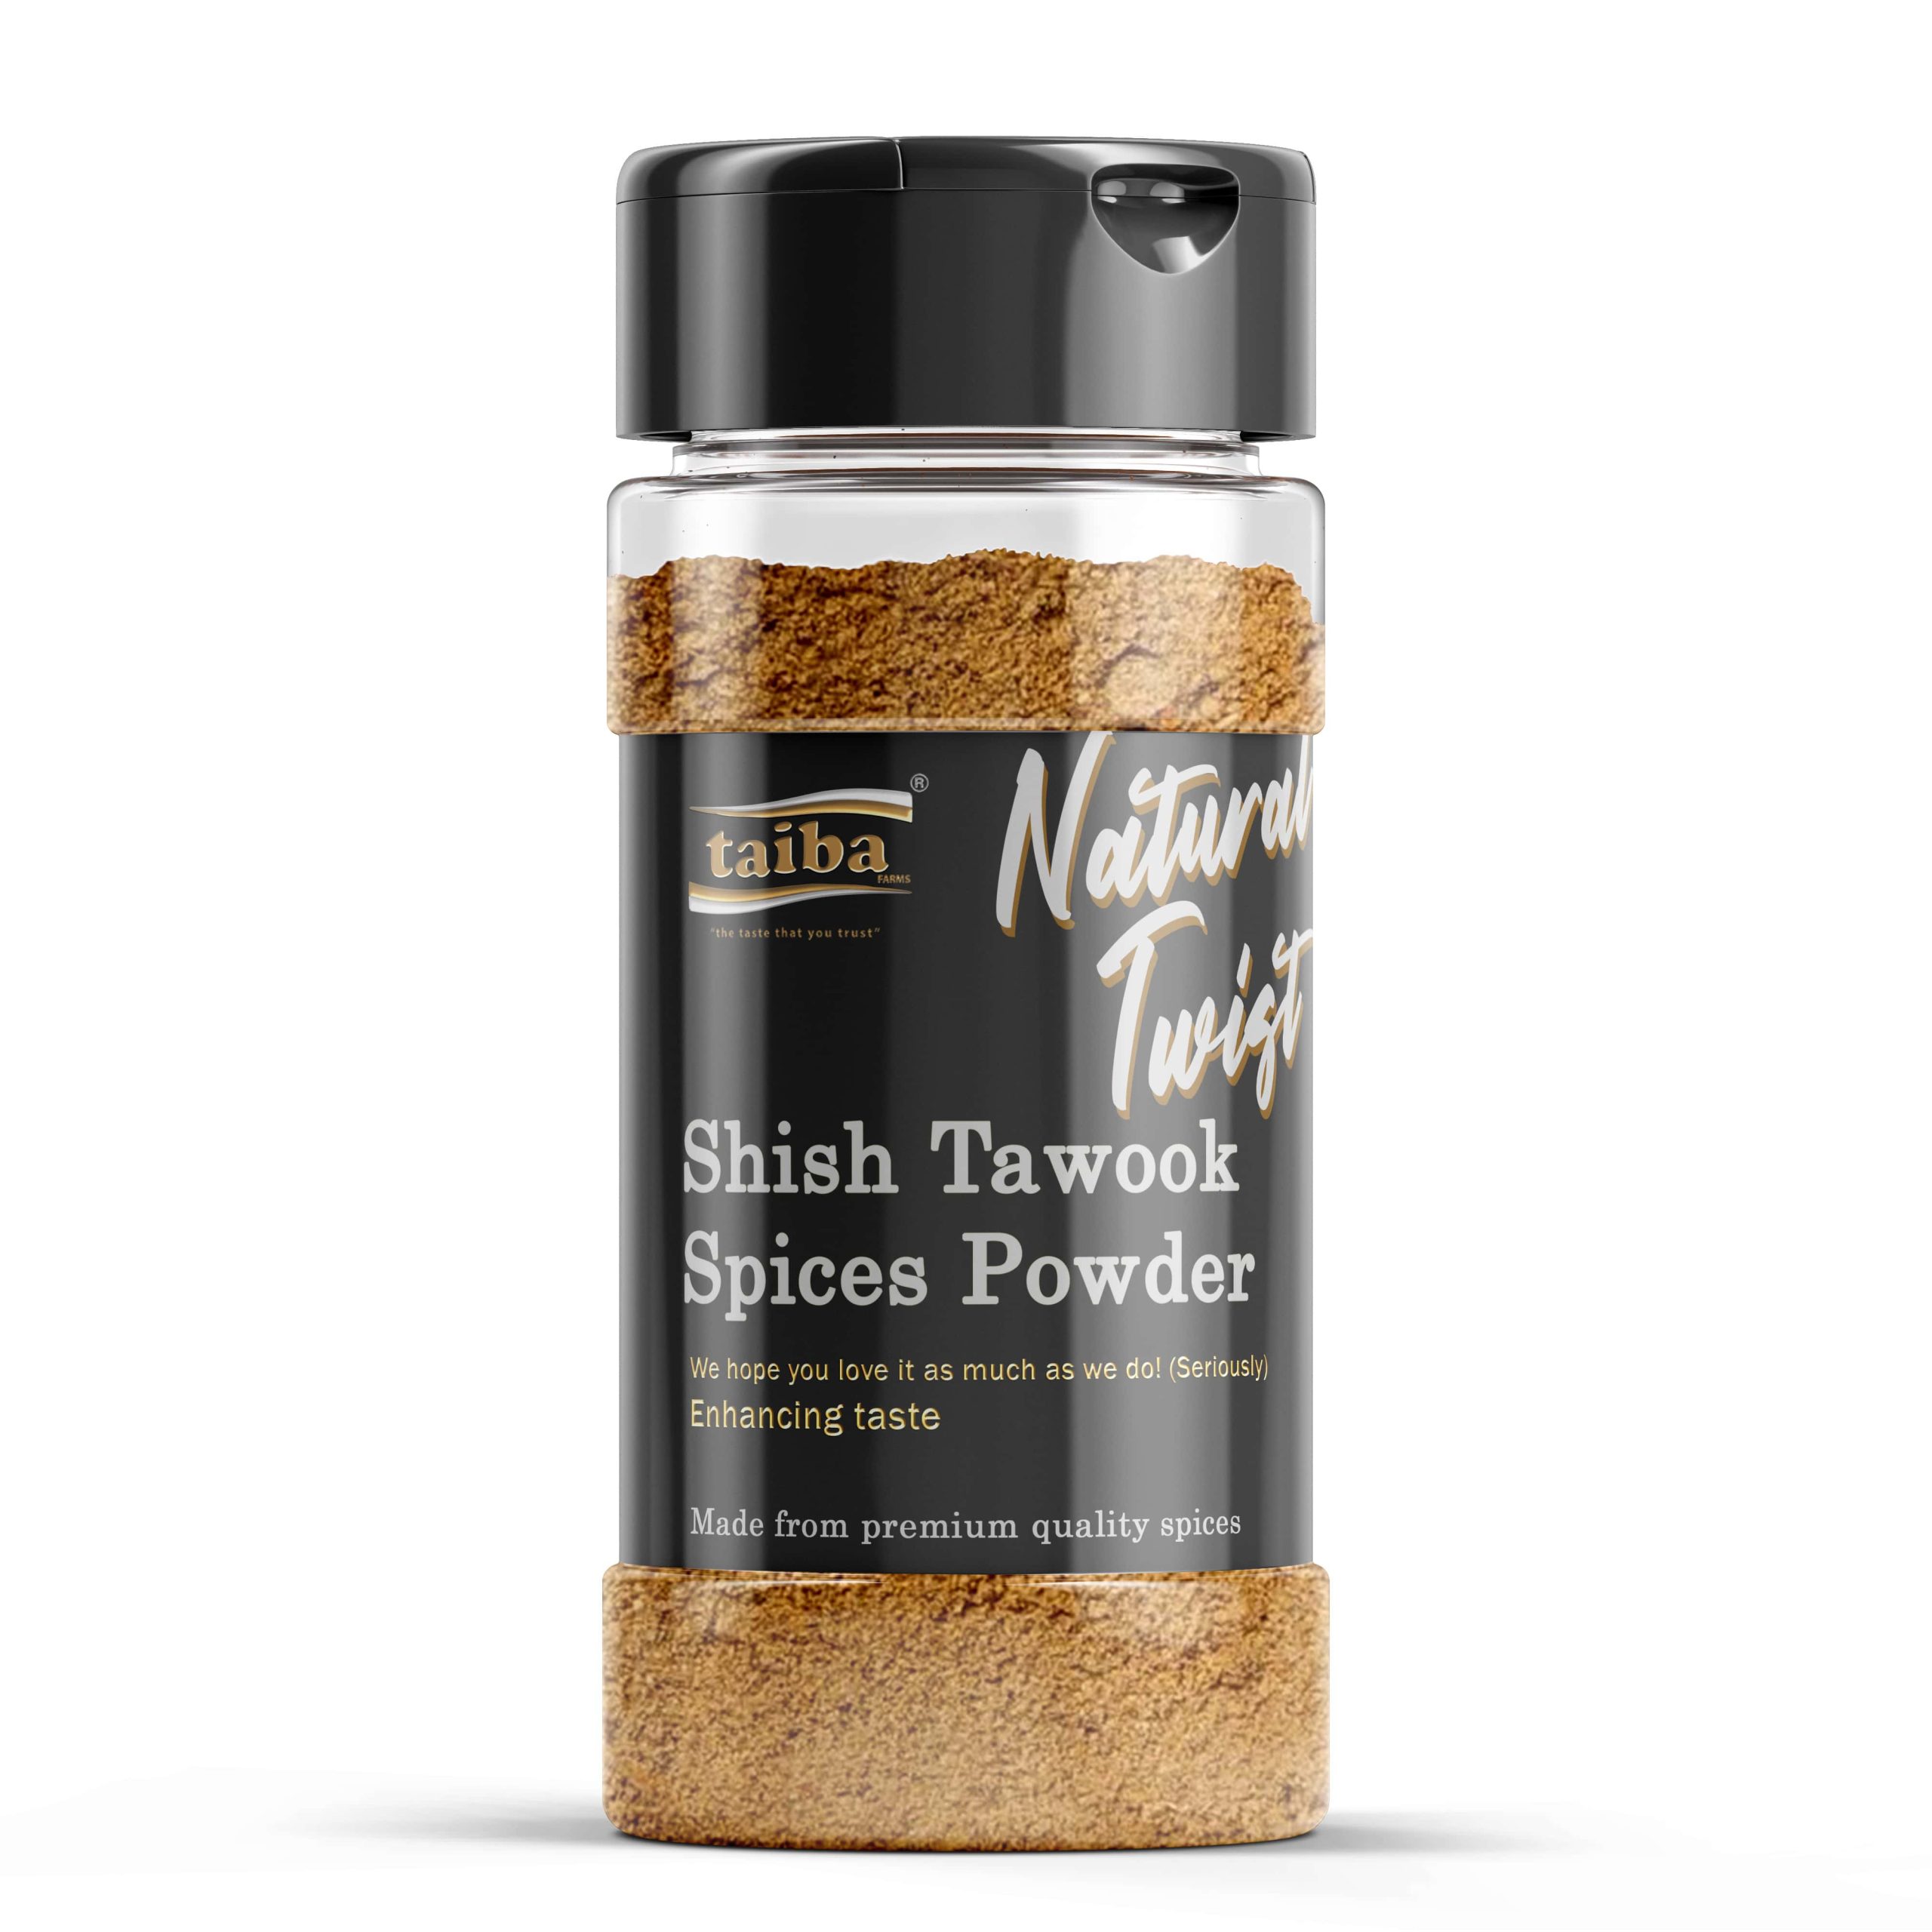 Shish-Tawook-Spices-online-grocery-hearps-and-spices-online-suppliers-in-UK-USA-UAE-KSA-Jordan-Egypt